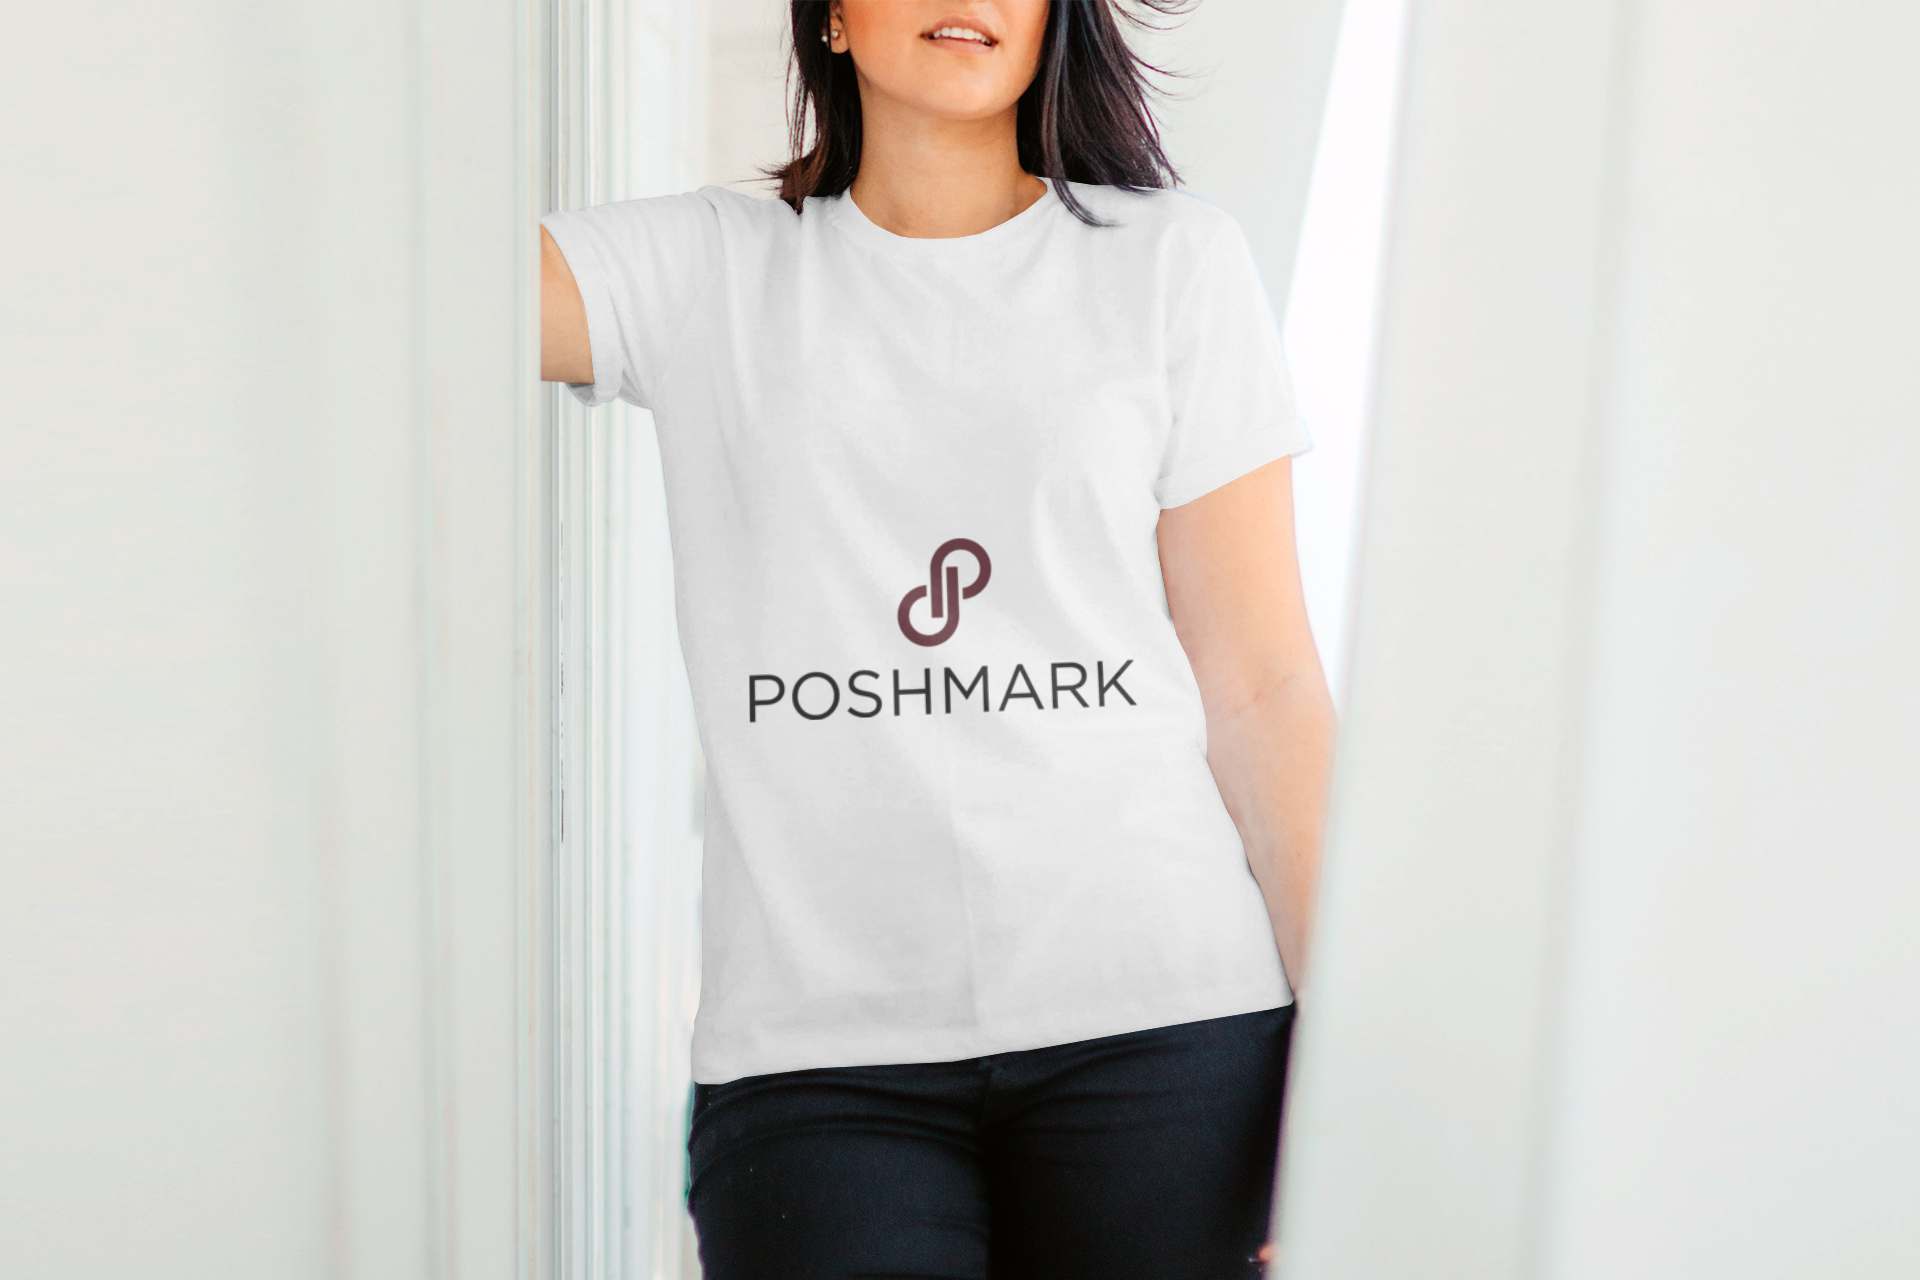 How to Invest in Poshmark IPO 2021